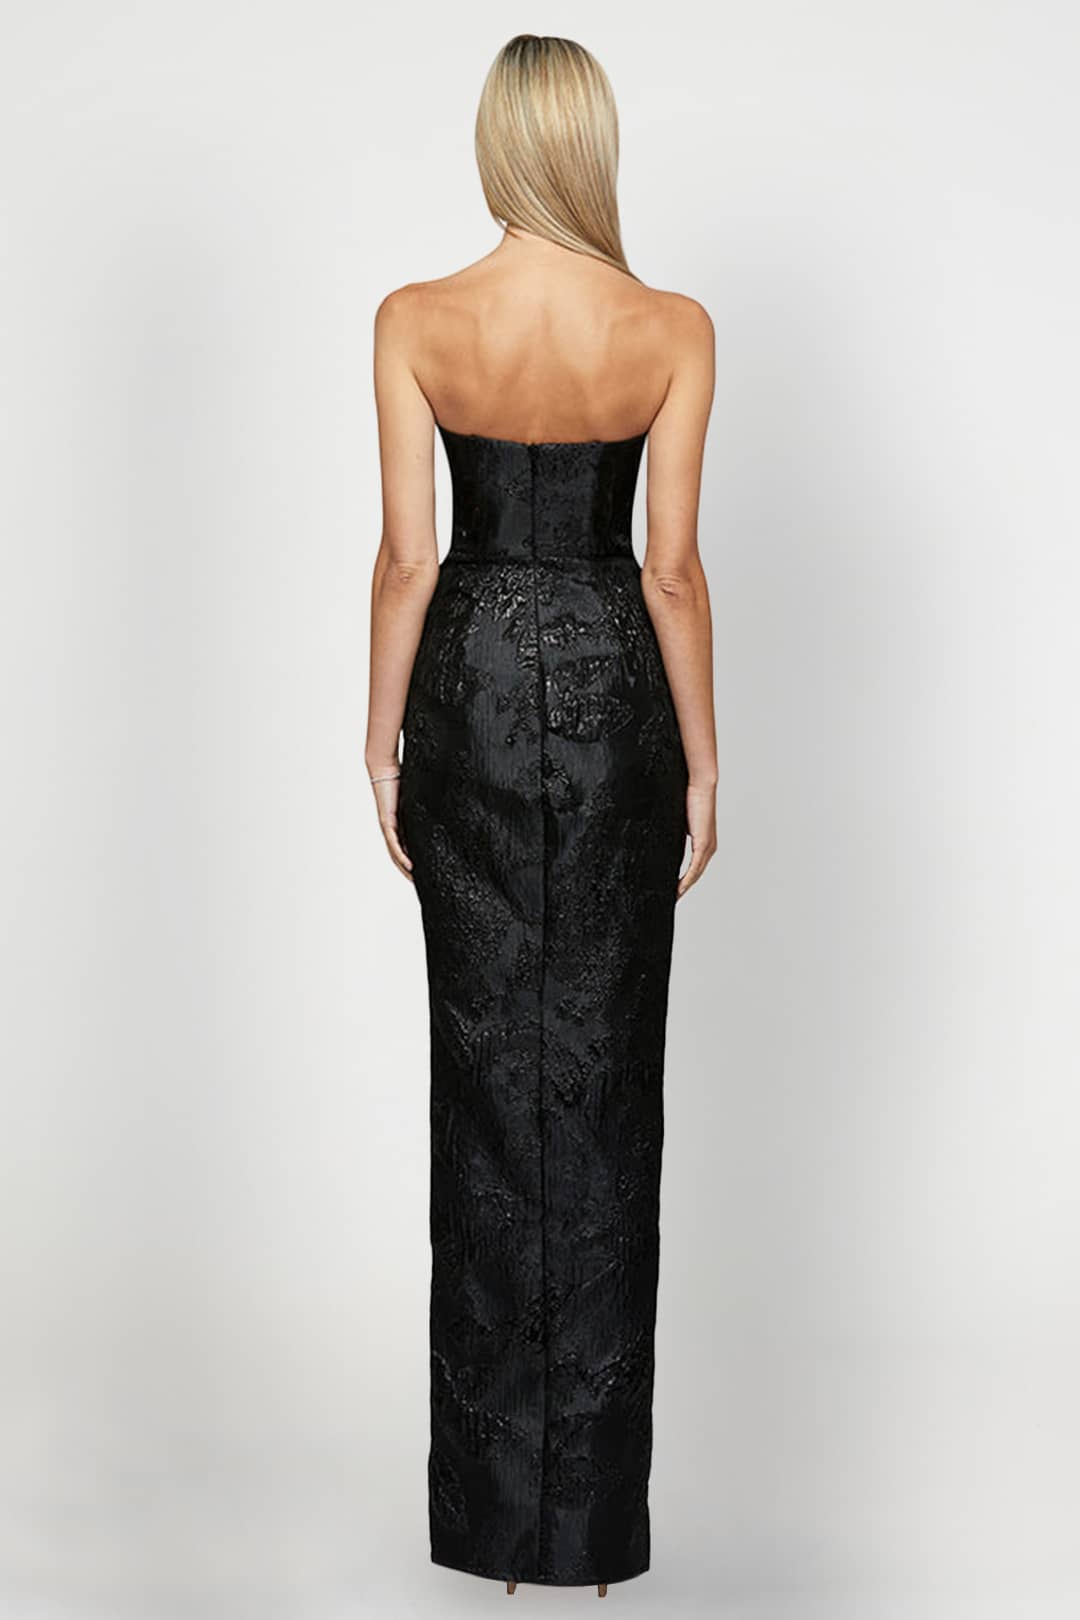 Tonaya Strapless Black Gown - Bariano - Rent A Dress Formal Gown Rental Back